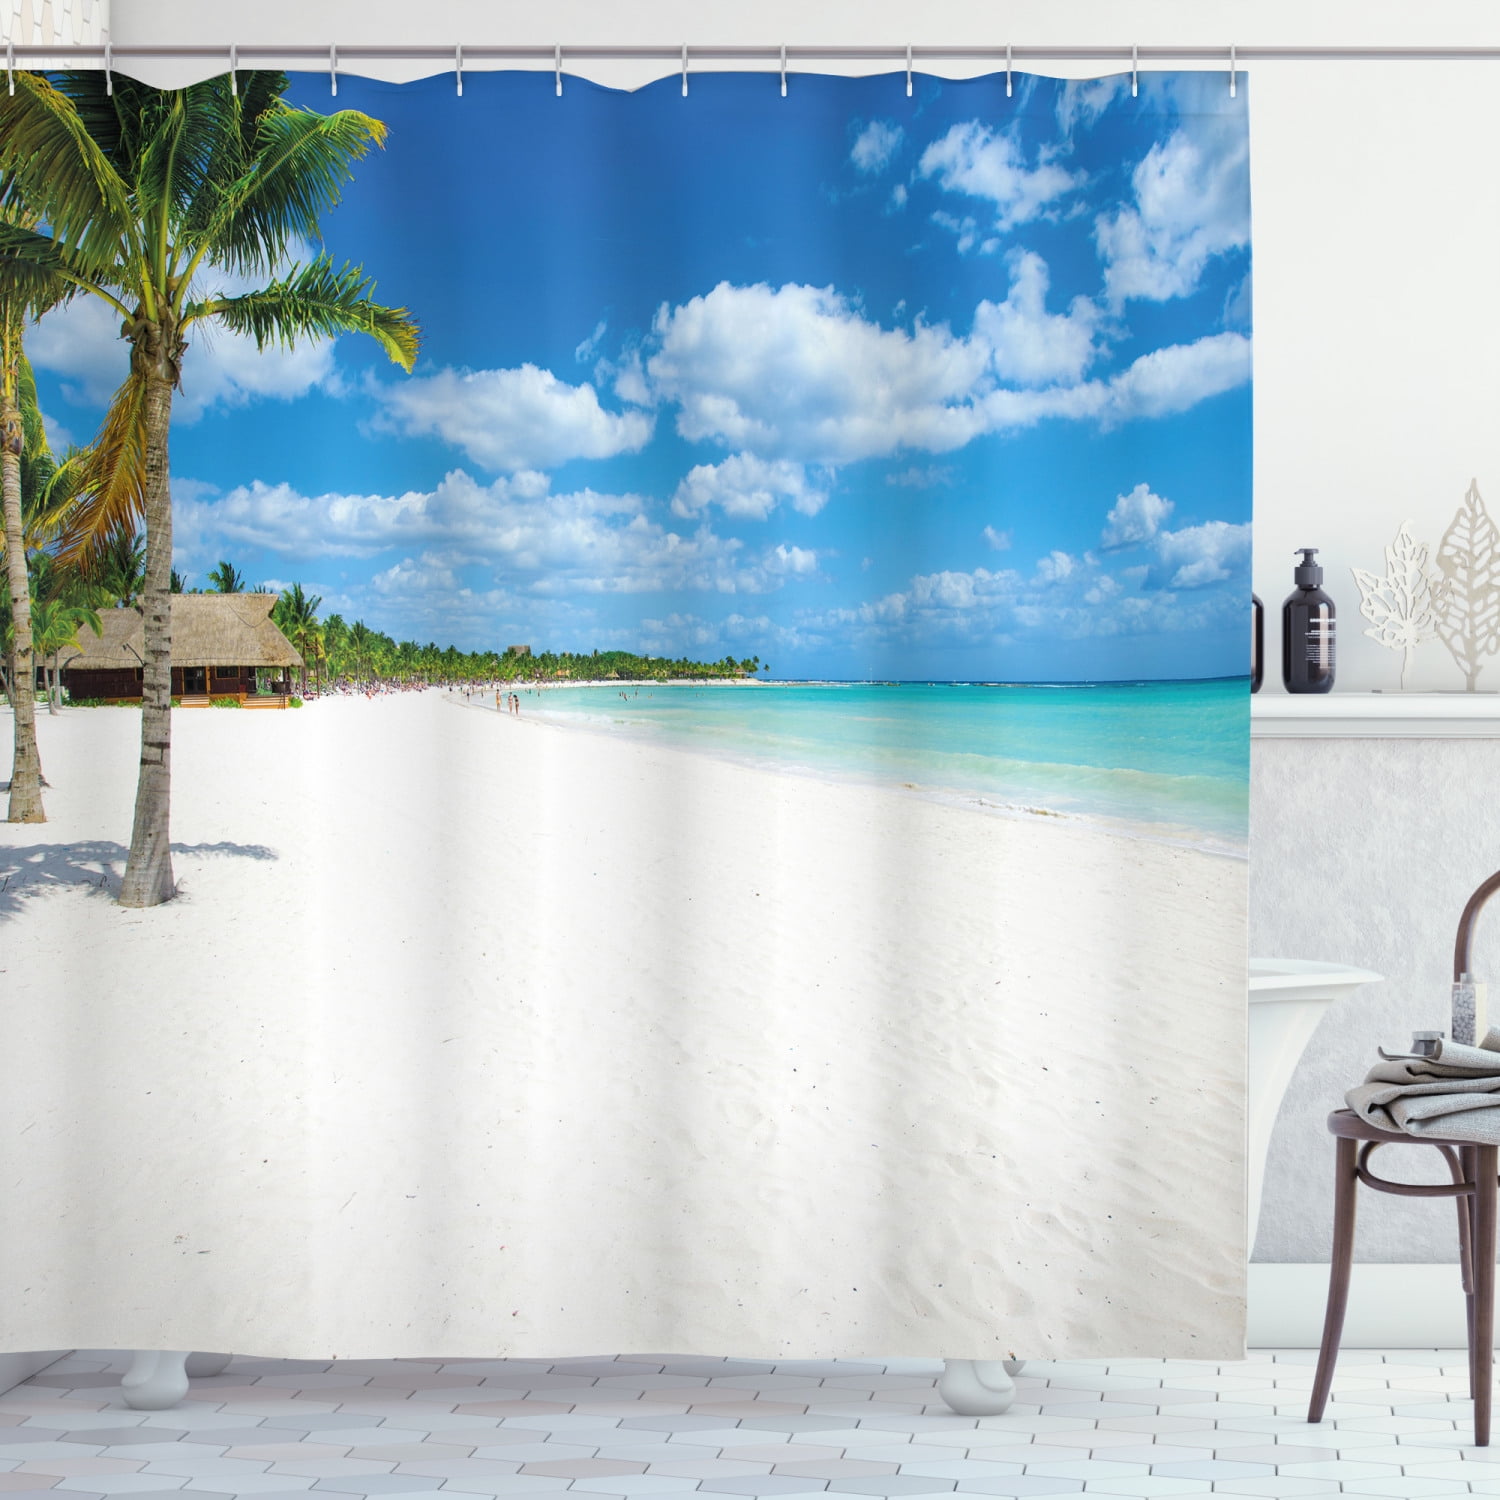 Details about   Tropical  Beach   FABRIC SHOWER CURTAIN, 